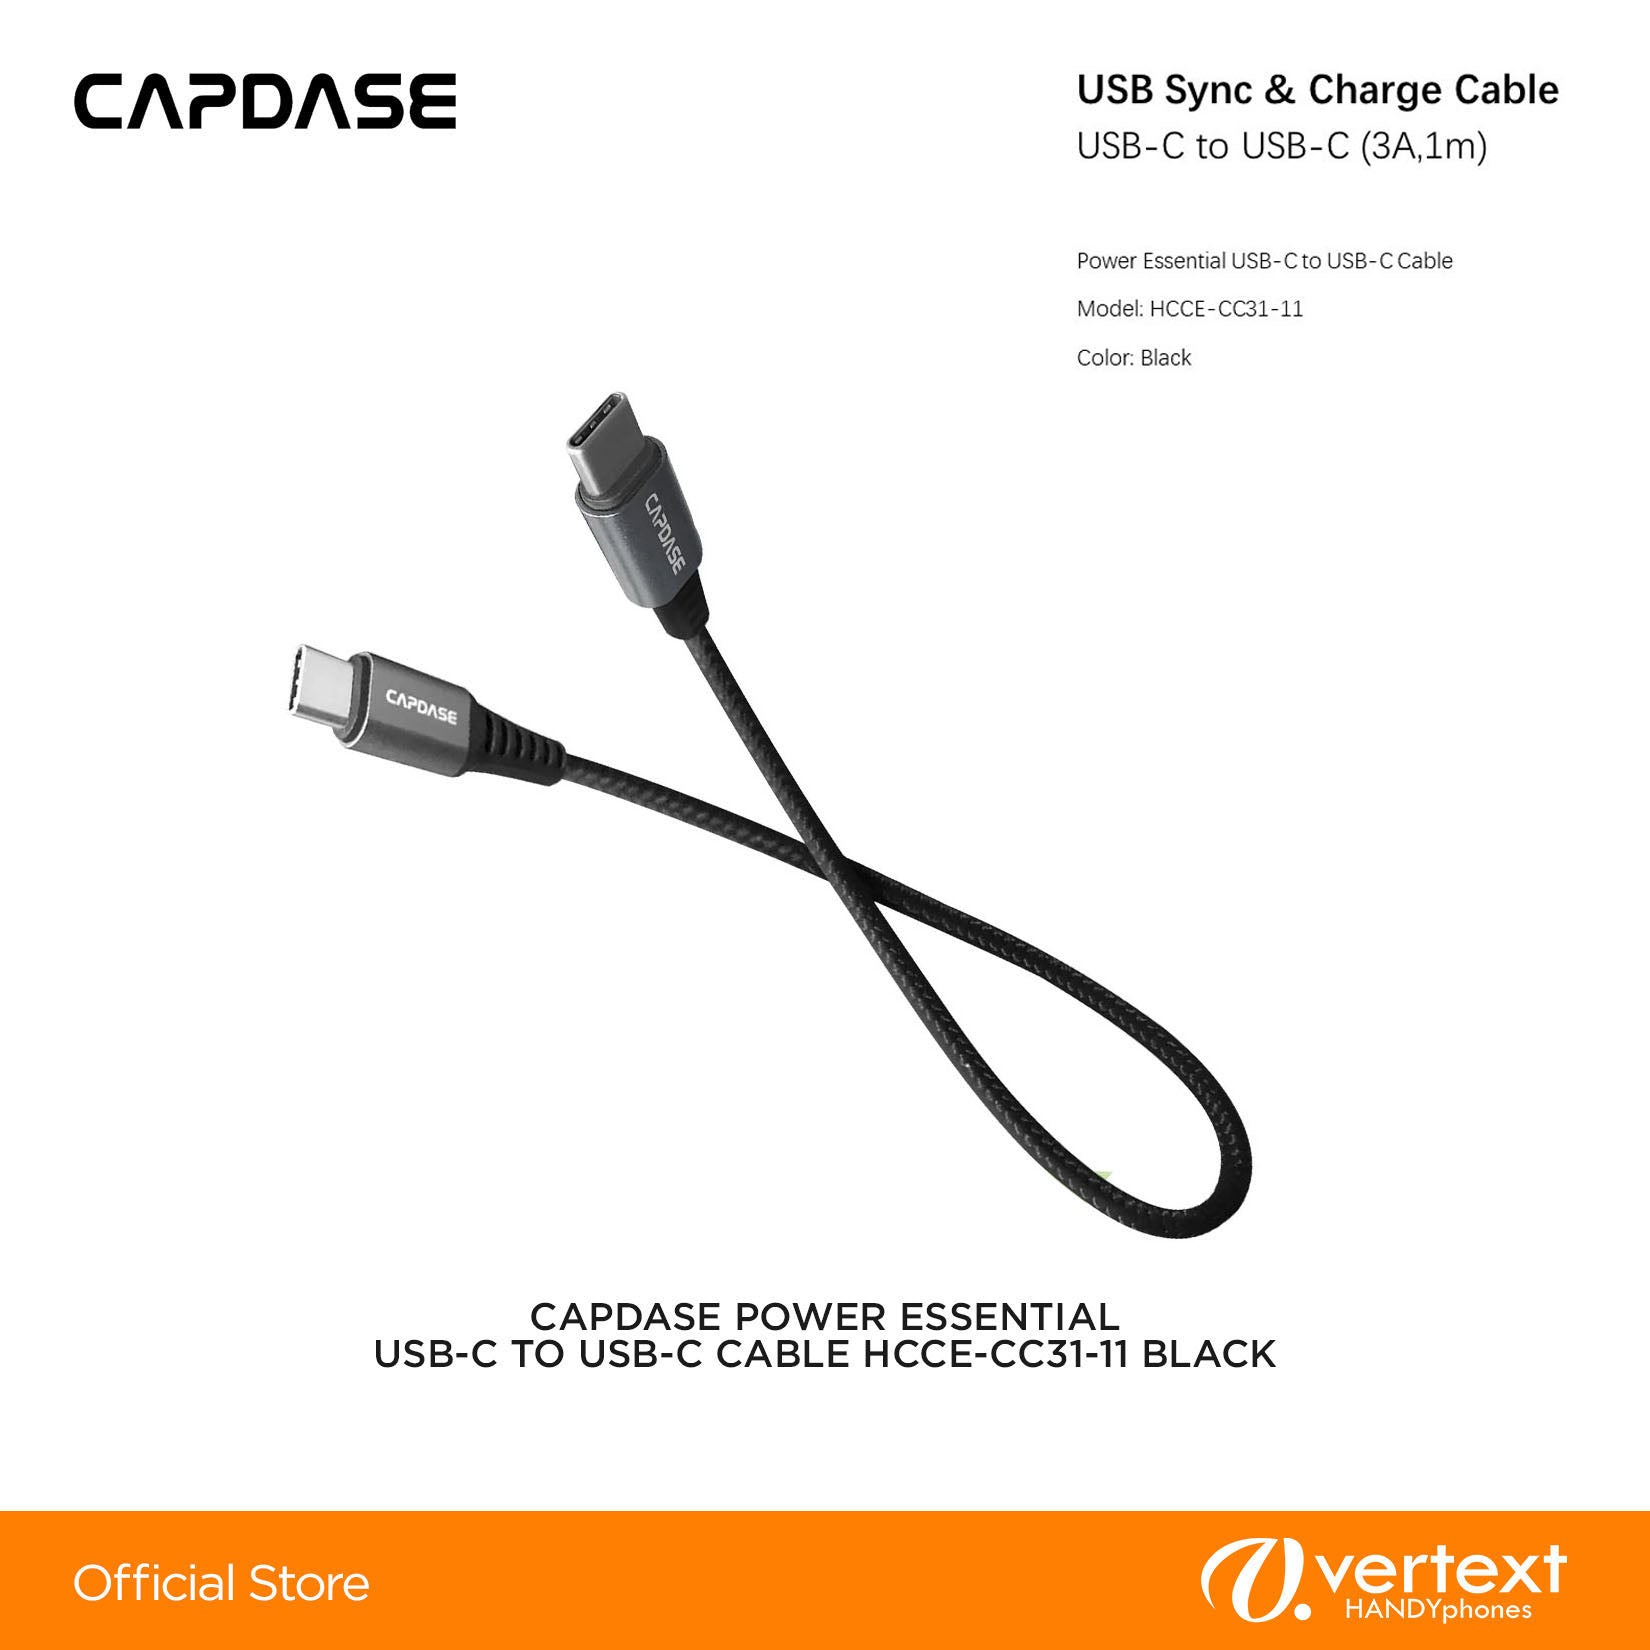 Capdase POWER ESSENTIAL USB-C TO USB-C CABLE HCCE-CC31-11